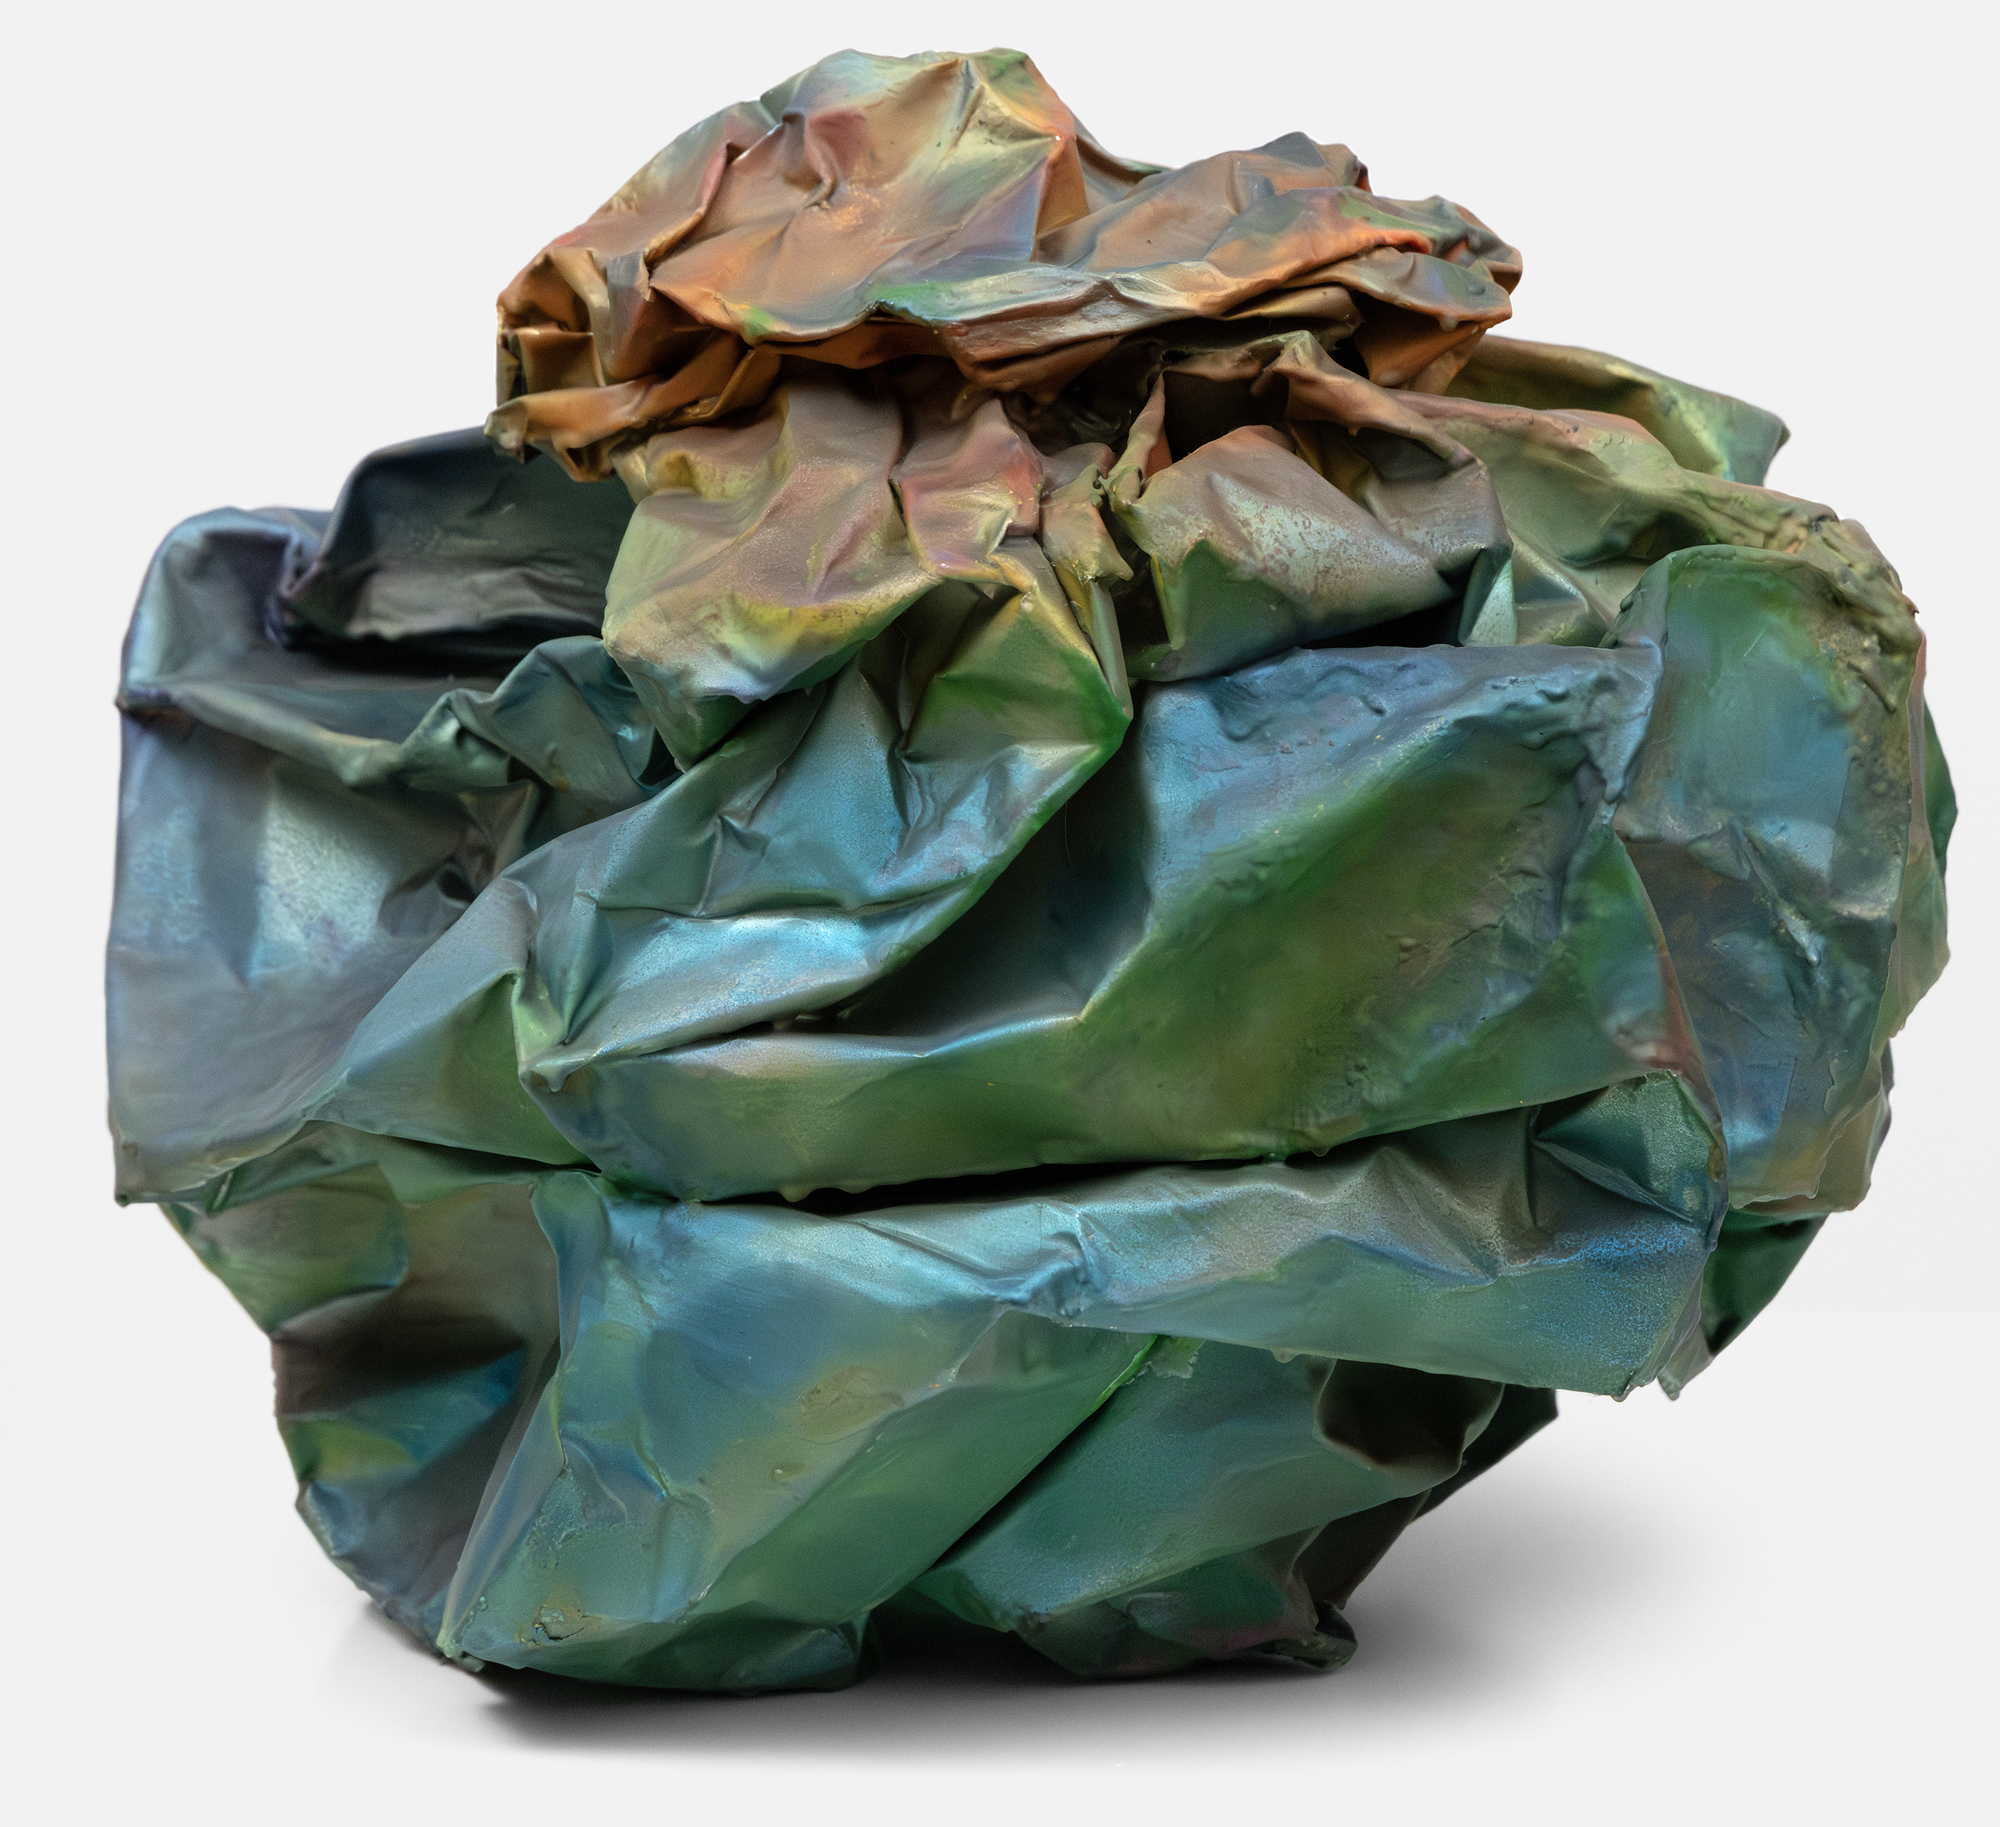 JOHN CHAMBERLAIN - ASARABACA - industrial weight aluminum foil with acrylic lacquer and polyester resin - 20 x 23 x 22 in.